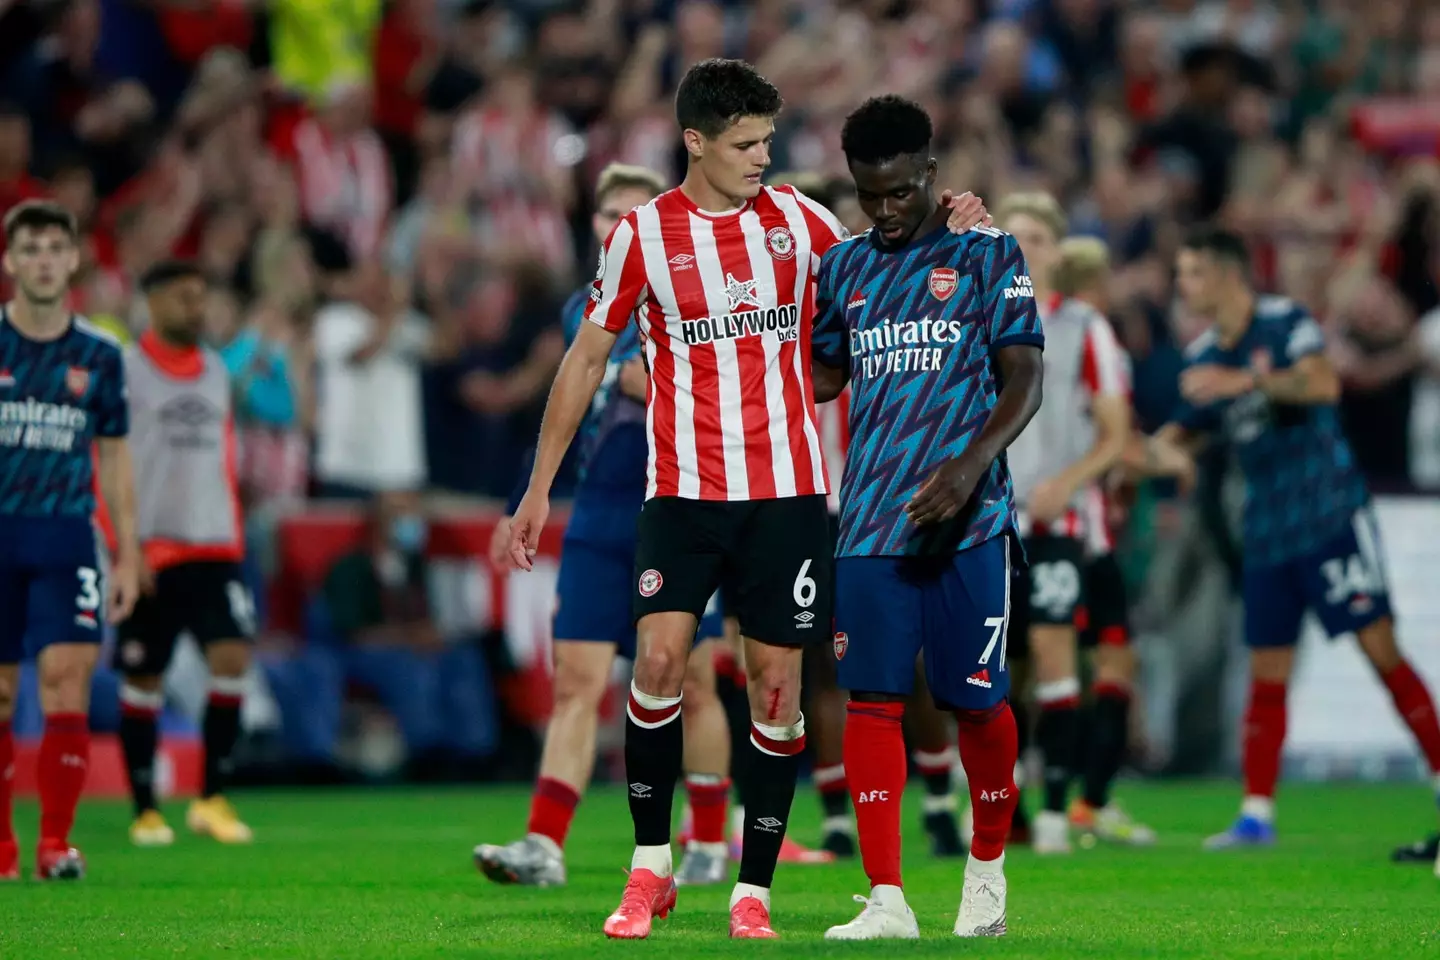 Arsenal were humiliated by newly-promoted Brentford in a damning 2-0 defeat